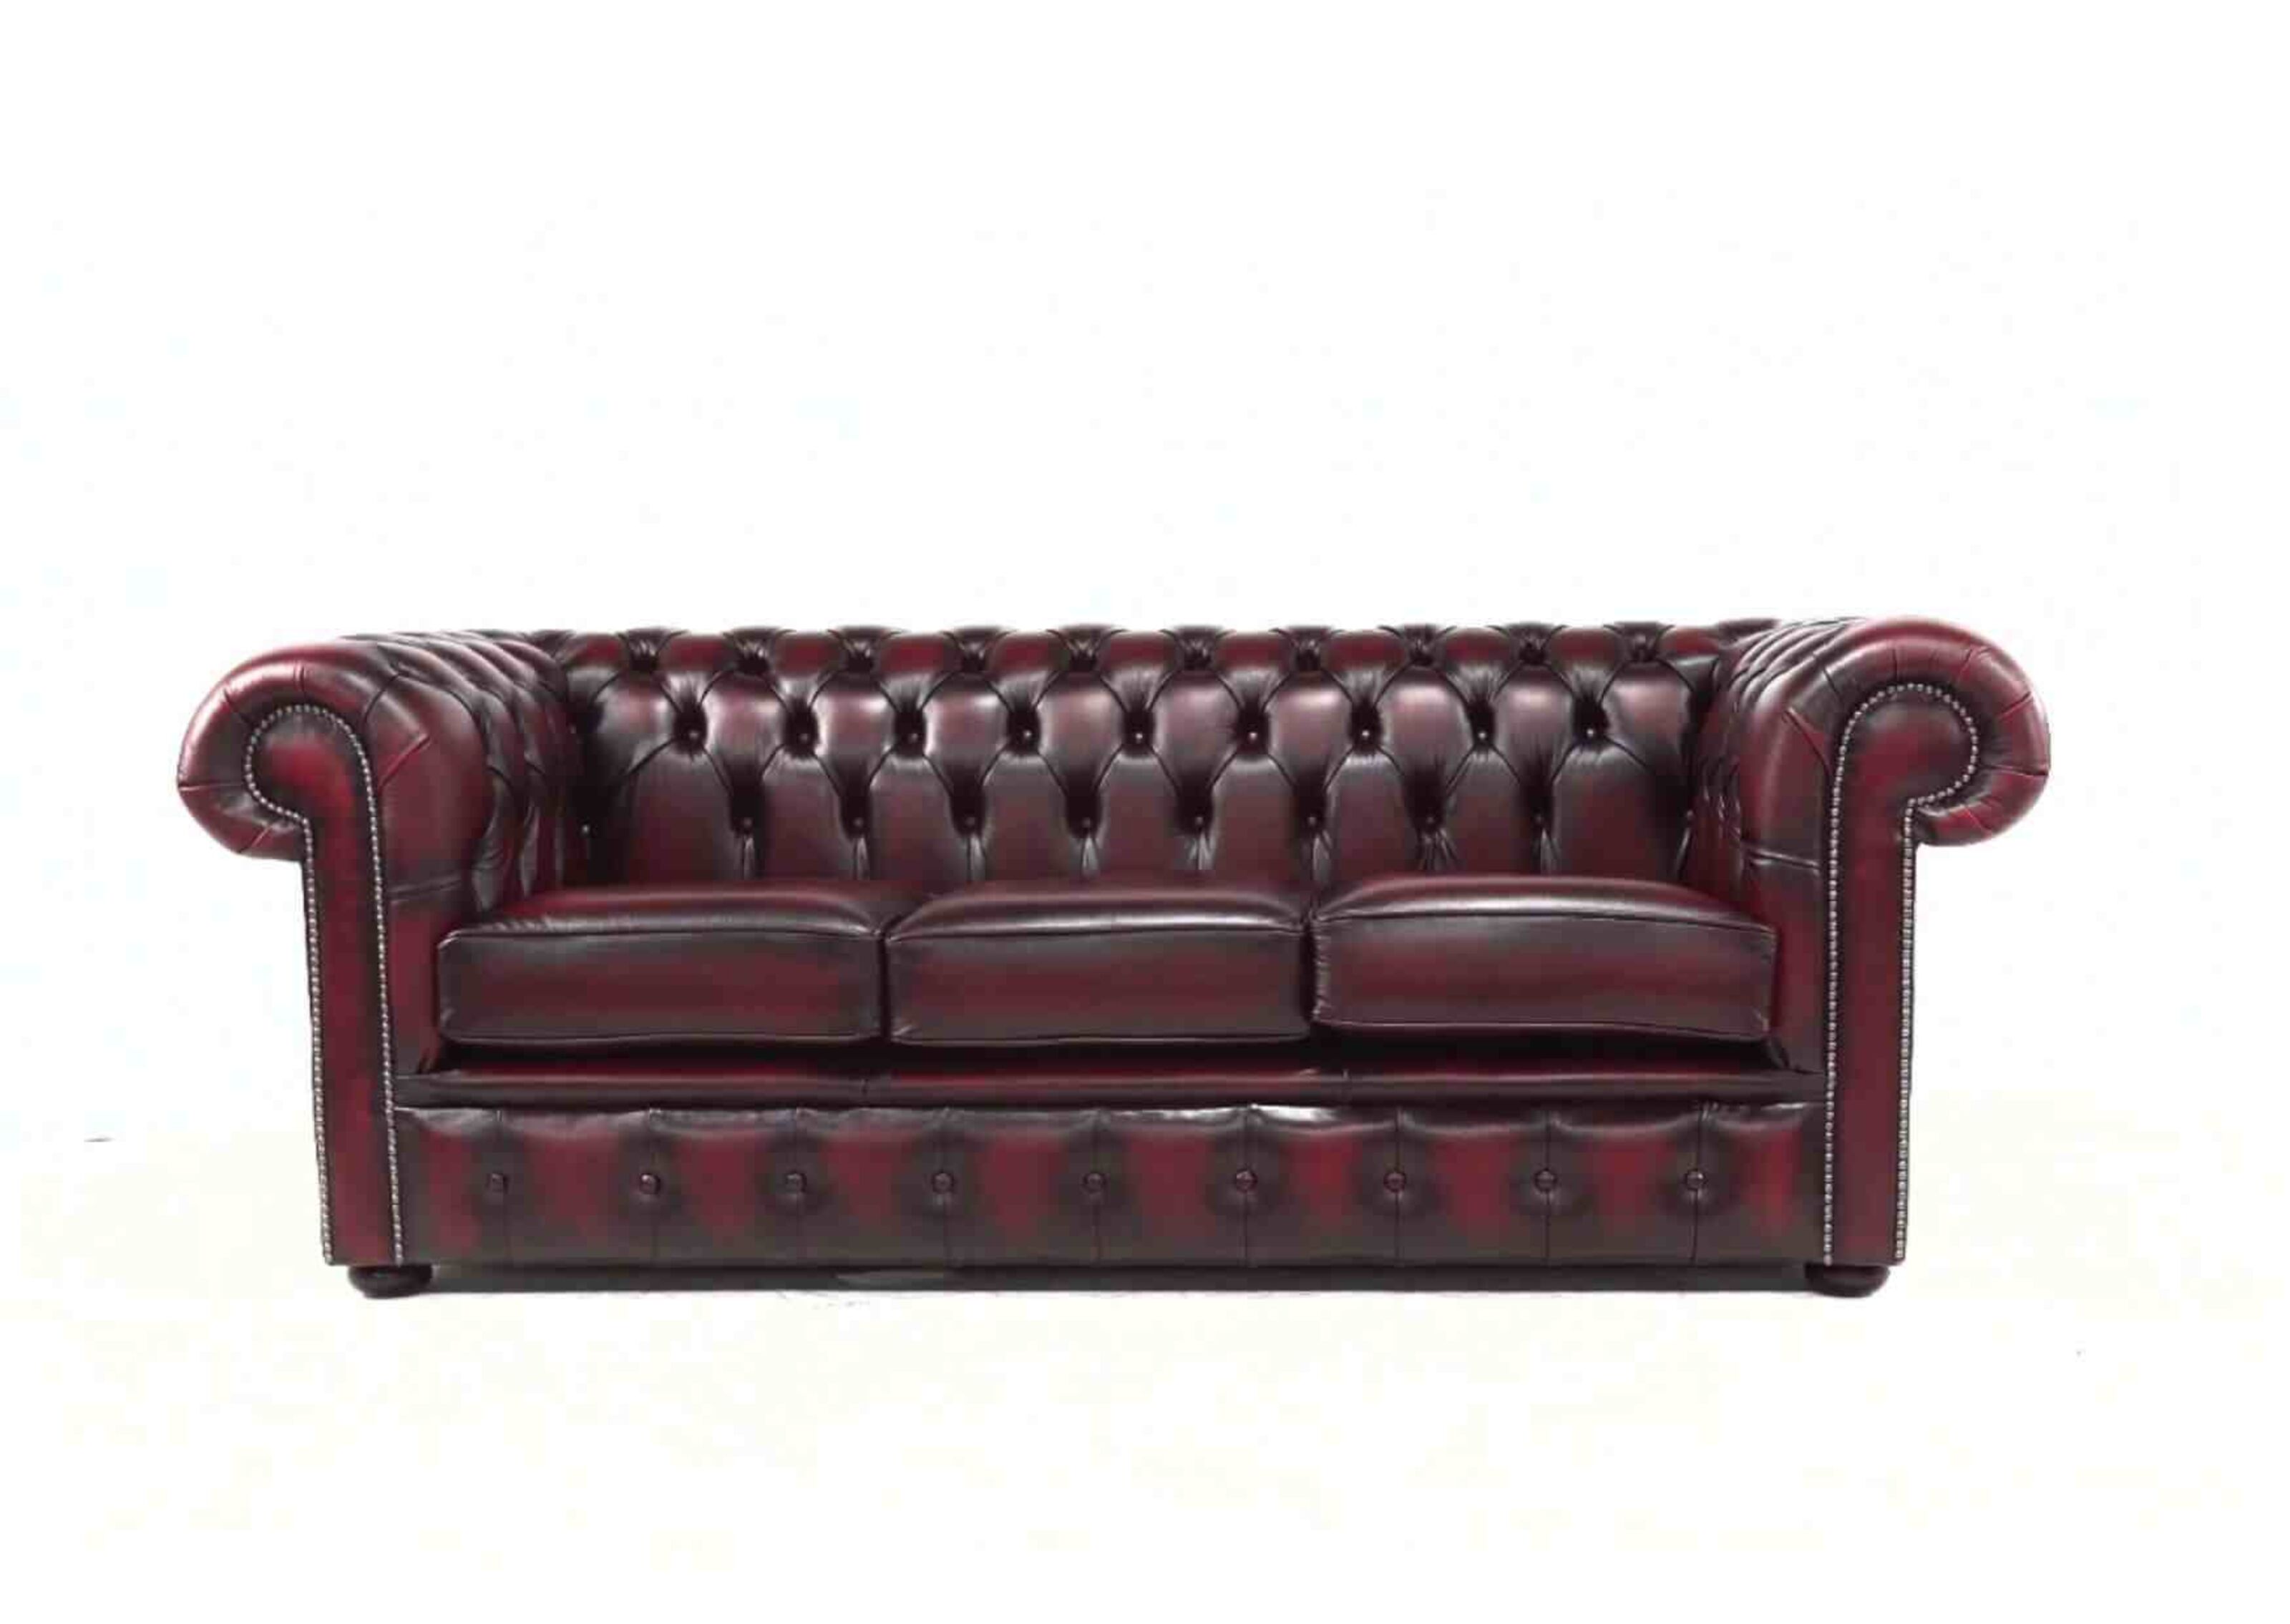 Shop Smart Chesterfield Sofas Available at Costco  %Post Title